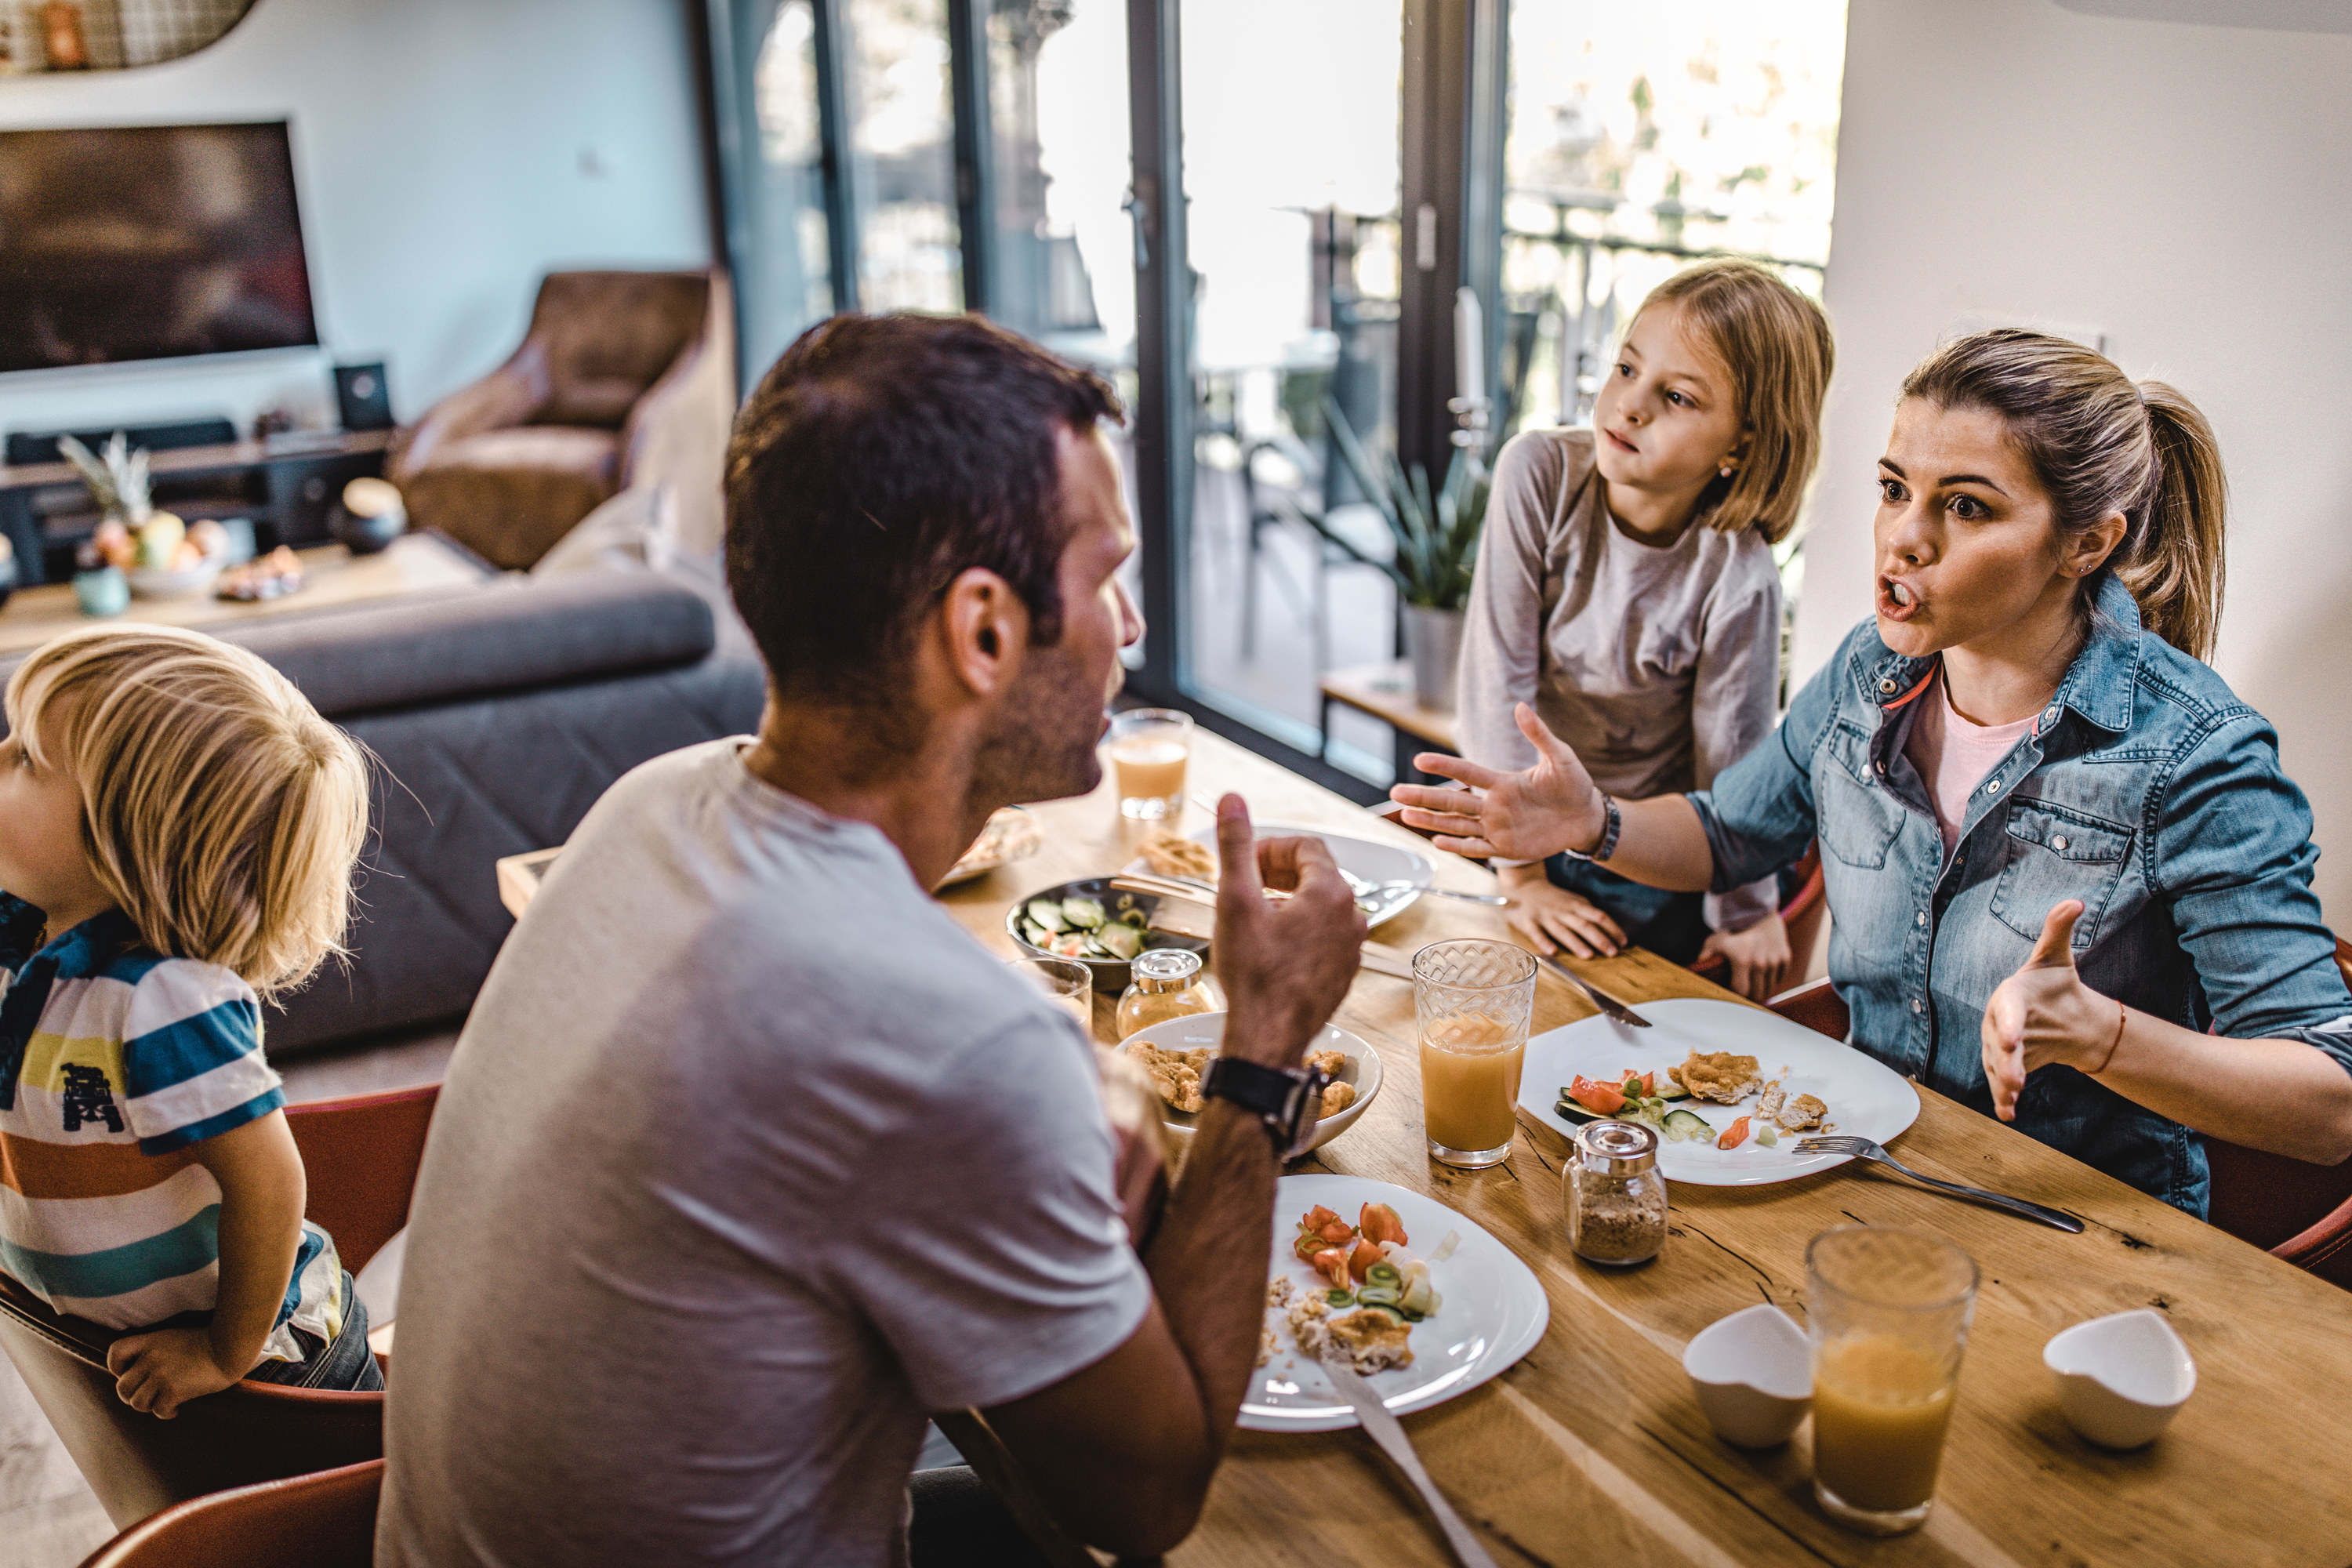 Young couple arguing during lunch time with their children in dining room. Focus is on woman